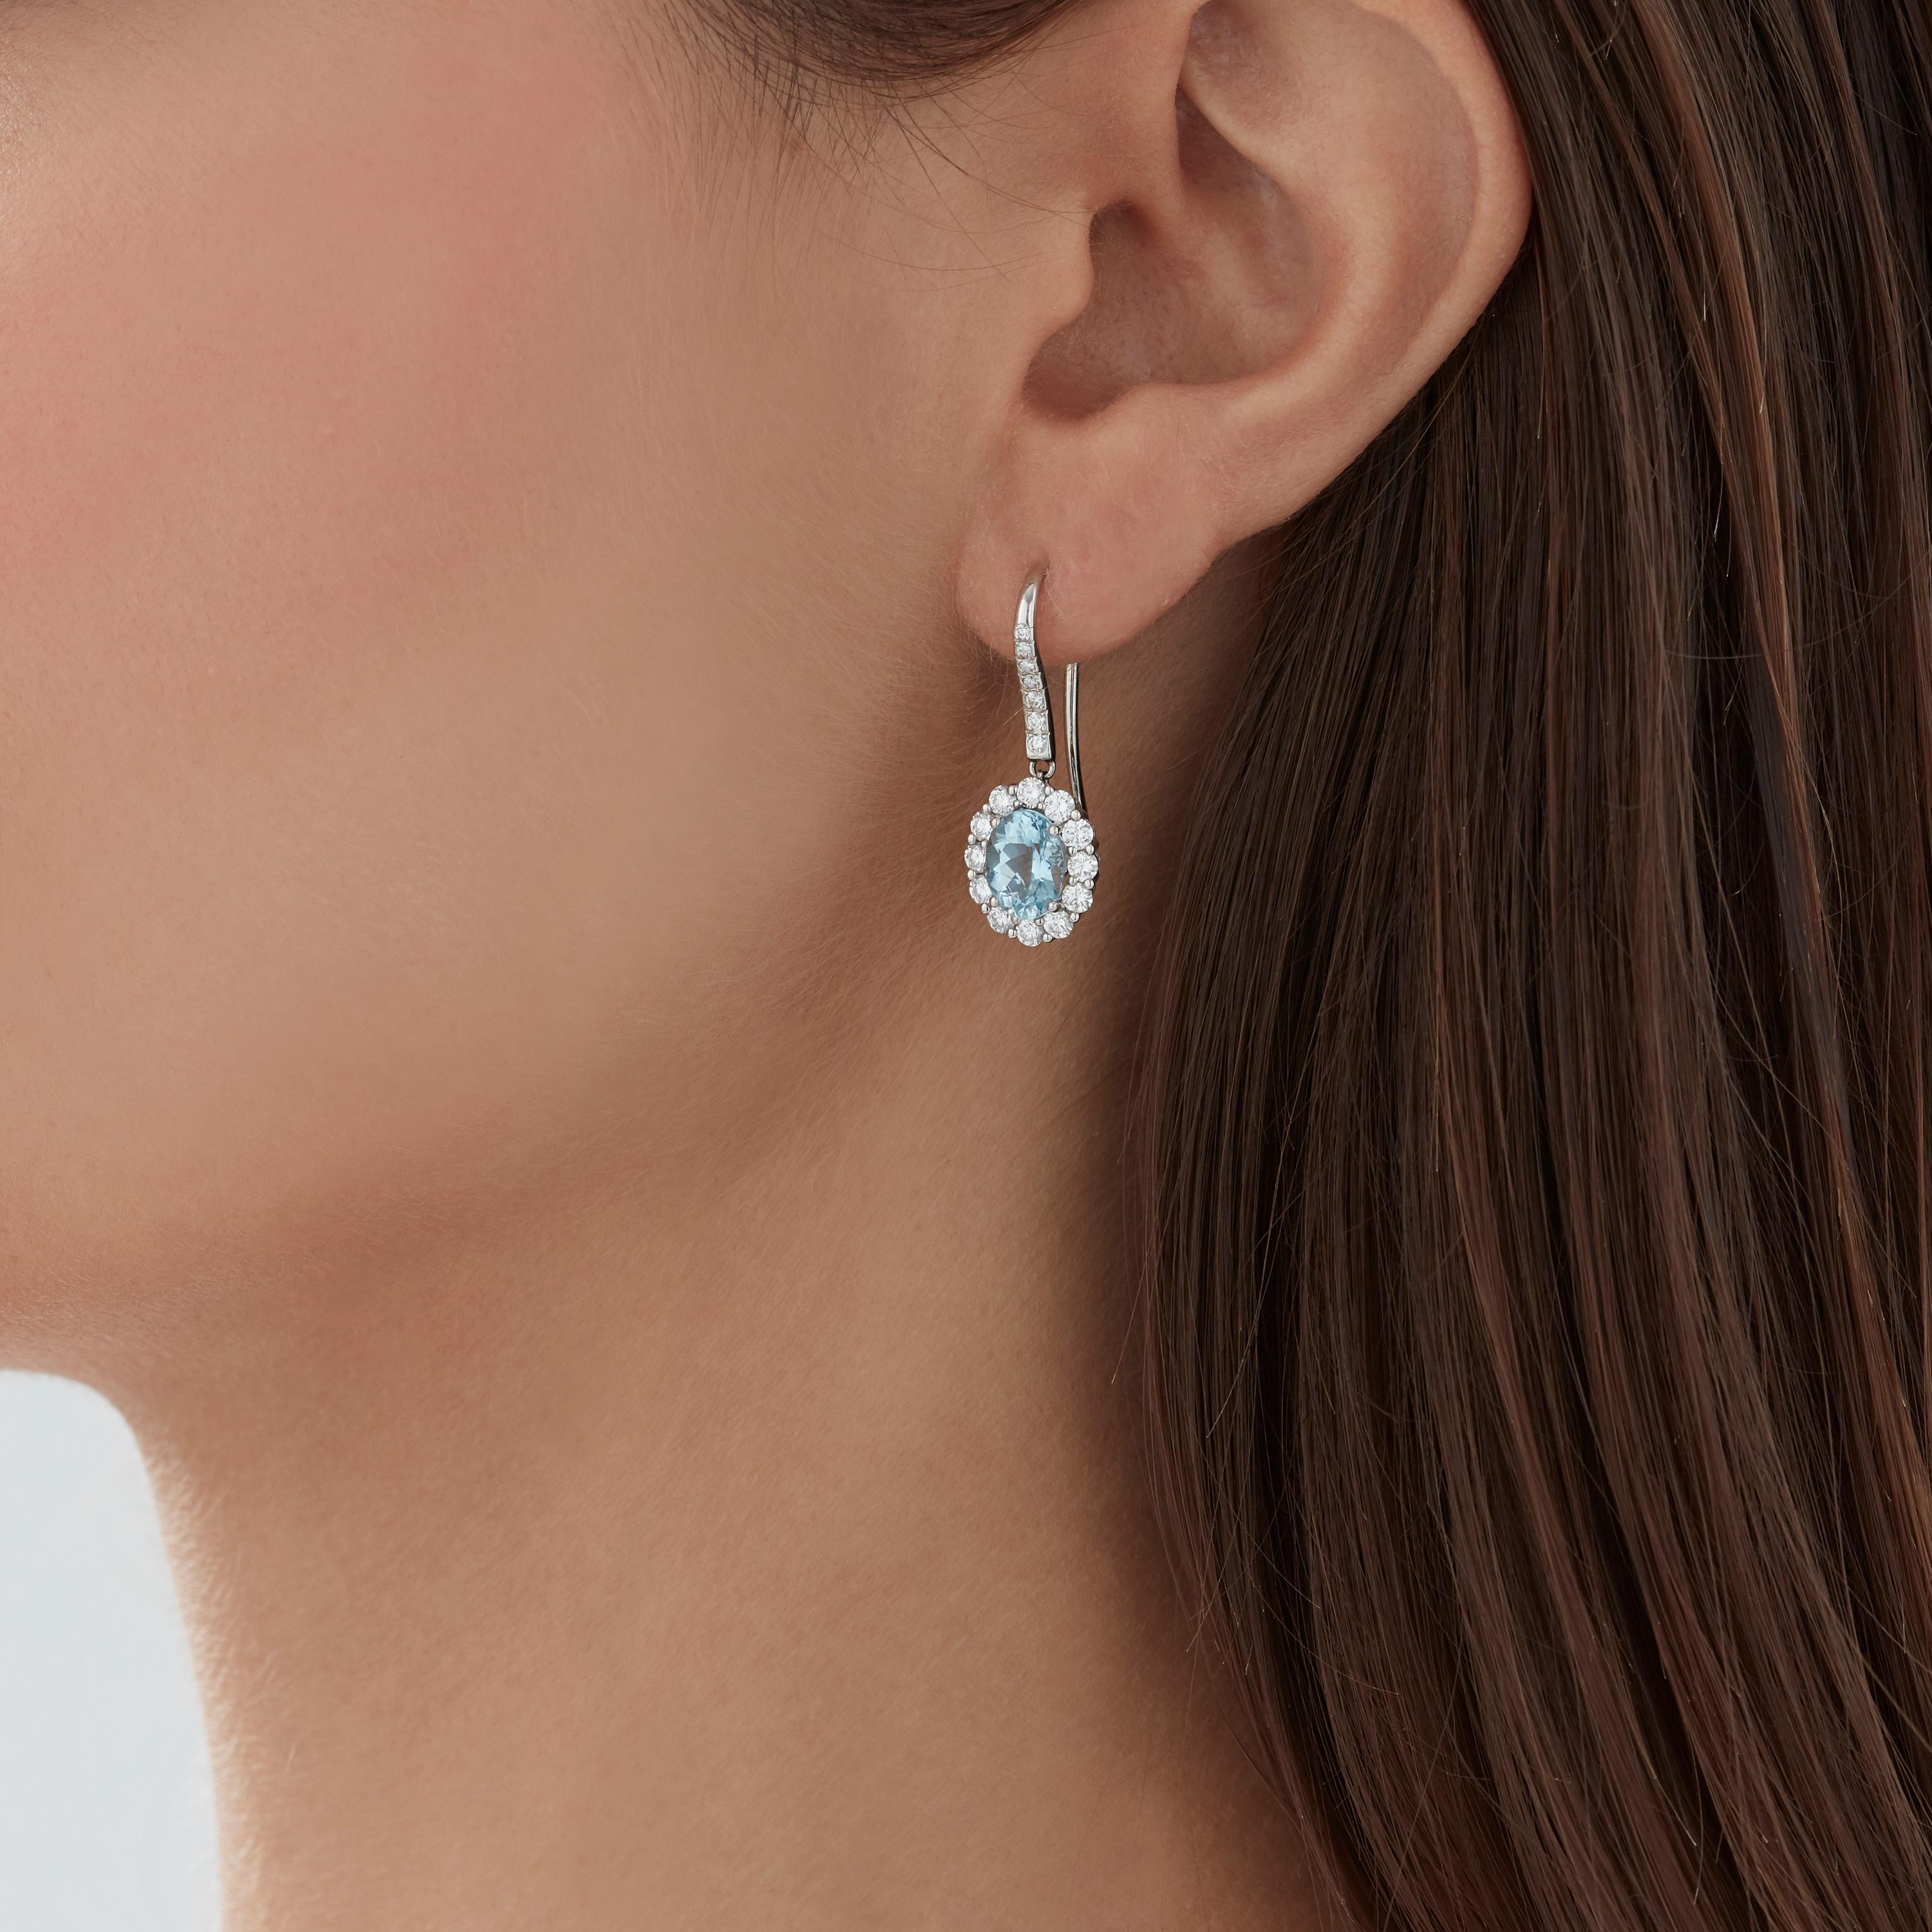 A House of Garrard pair of platinum drop earrings from the 'Garrard 1735' collection, set with central oval aquamarines and round white diamonds.

38 round white diamonds weighing: 1.18cts
2 oval aquamarines approx 8x6mm

The House of Garrard is the